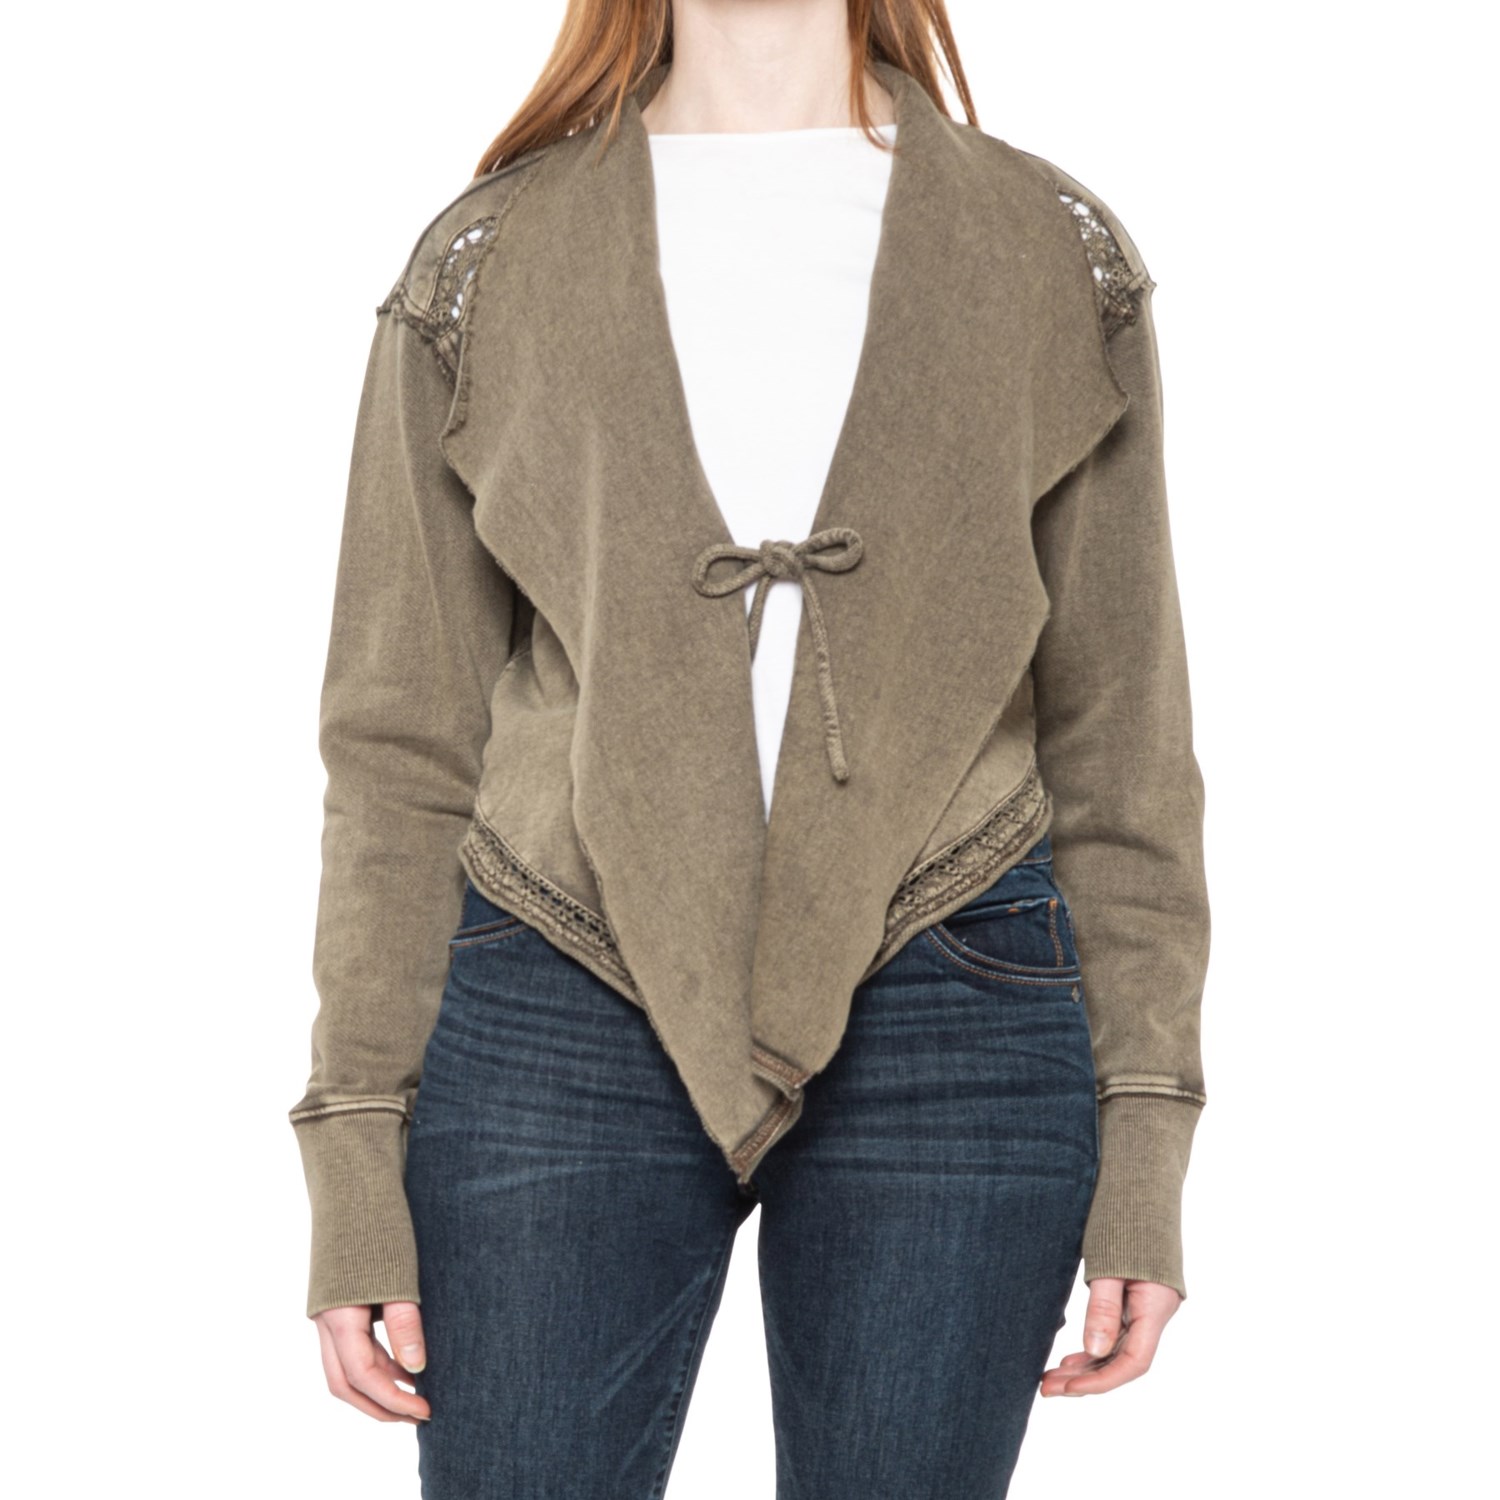 Free People Lost Cause Cardigan Sweater (For Women)